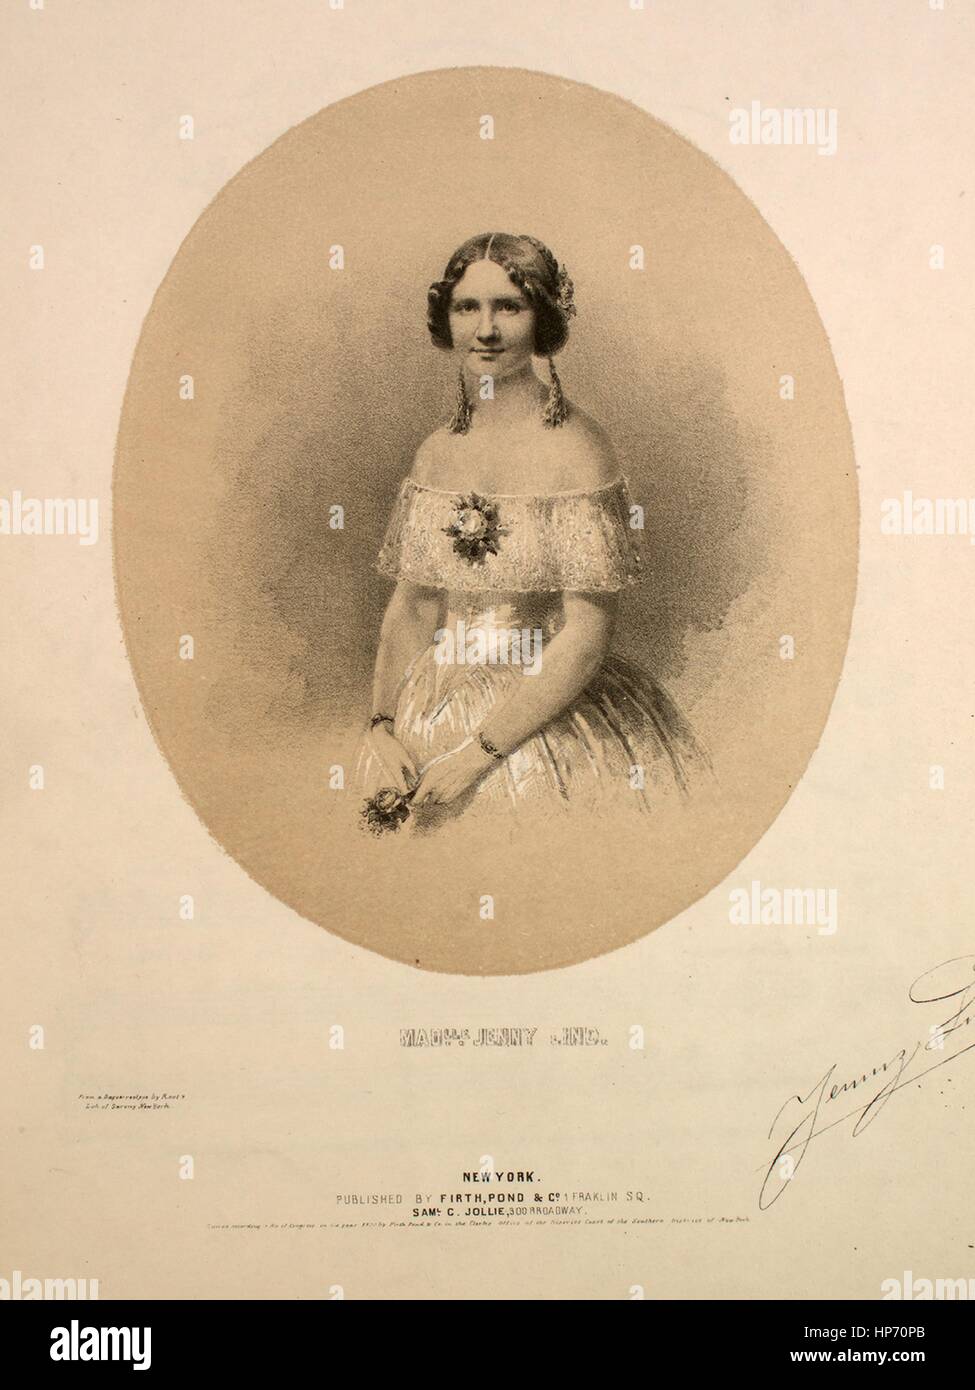 Sheet music cover image of the song 'I Can But Weep (To Mussich Weinen Bitterlich) [English and German]', with original authorship notes reading 'The Music by Robert Schumann', United States, 1850. The publisher is listed as 'Firth, Pond and Co., 1 Franklin Sq.', the form of composition is 'strophic', the instrumentation is 'piano and voice', the first line reads 'When looking on thine azure eyes, how swiftly ev'ry trouble flew', and the illustration artist is listed as 'From a Daguerreotype by Root; Lith. of Sarony, New York; Quidor Engvr.'. Stock Photo